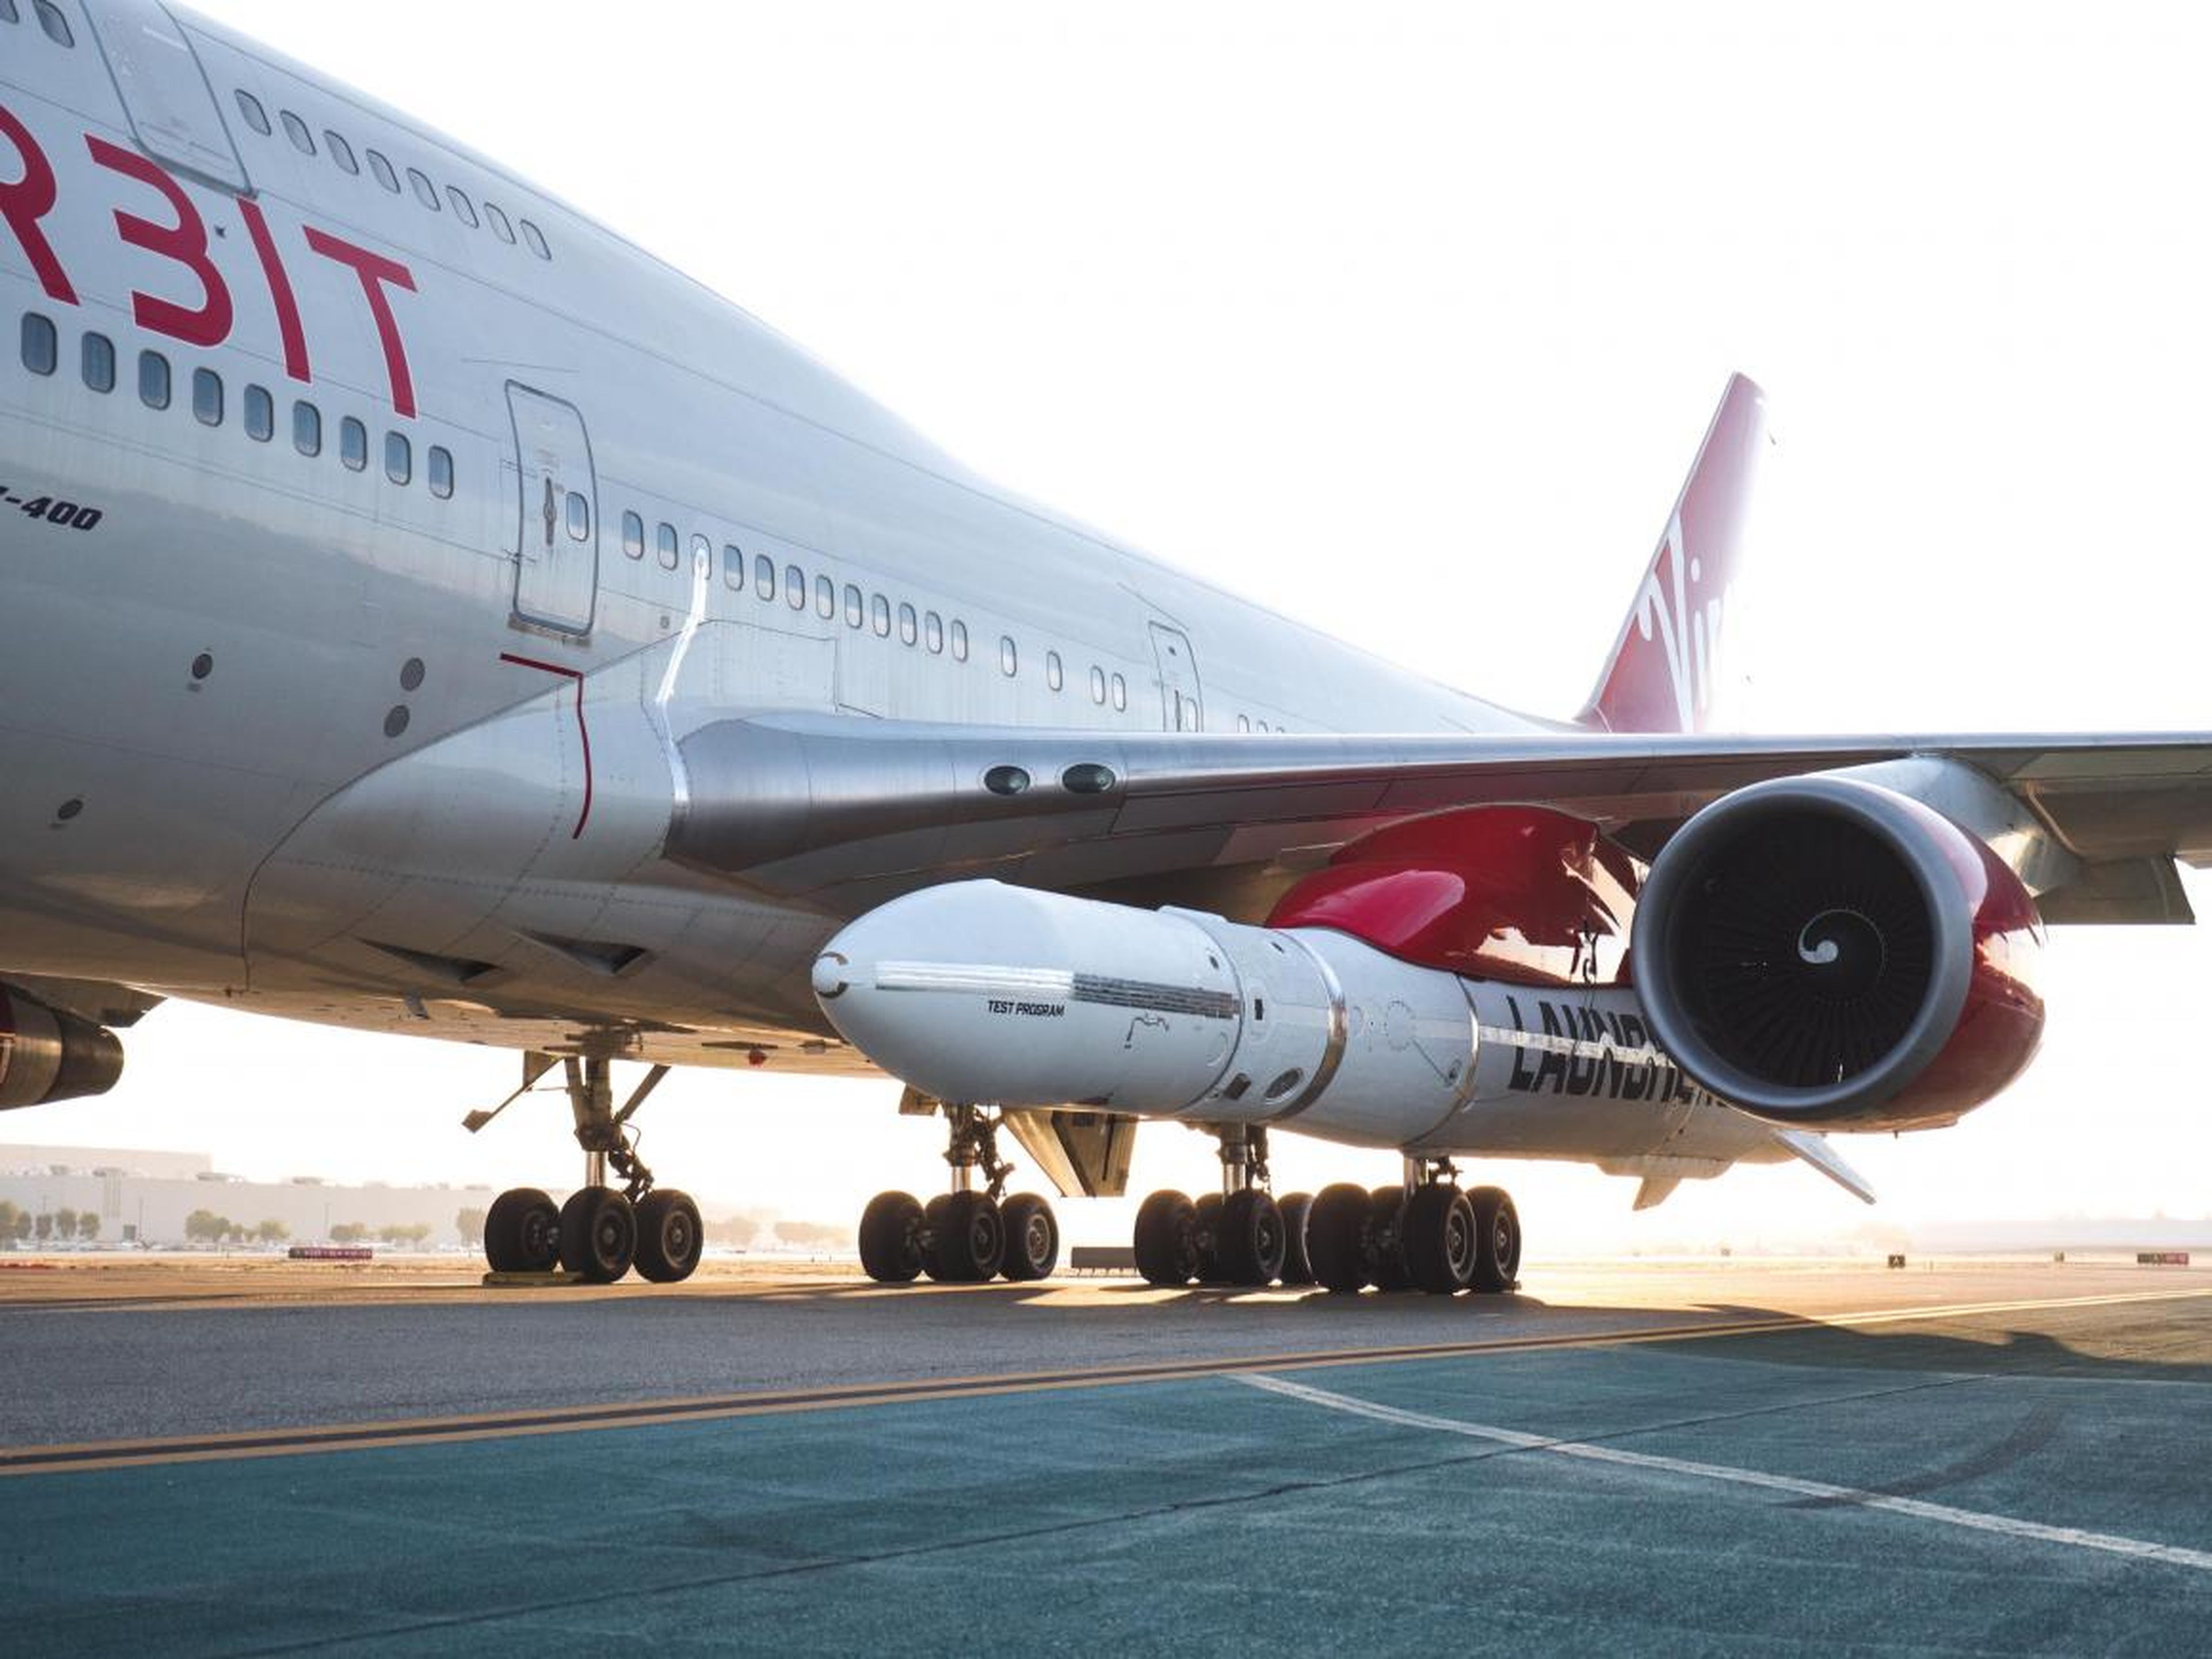 Virgin Orbit's next step is to pull off a series of "captive carry" flights, in which Cosmic Girl takes off and flies around with LauncherOne attached to its wing.